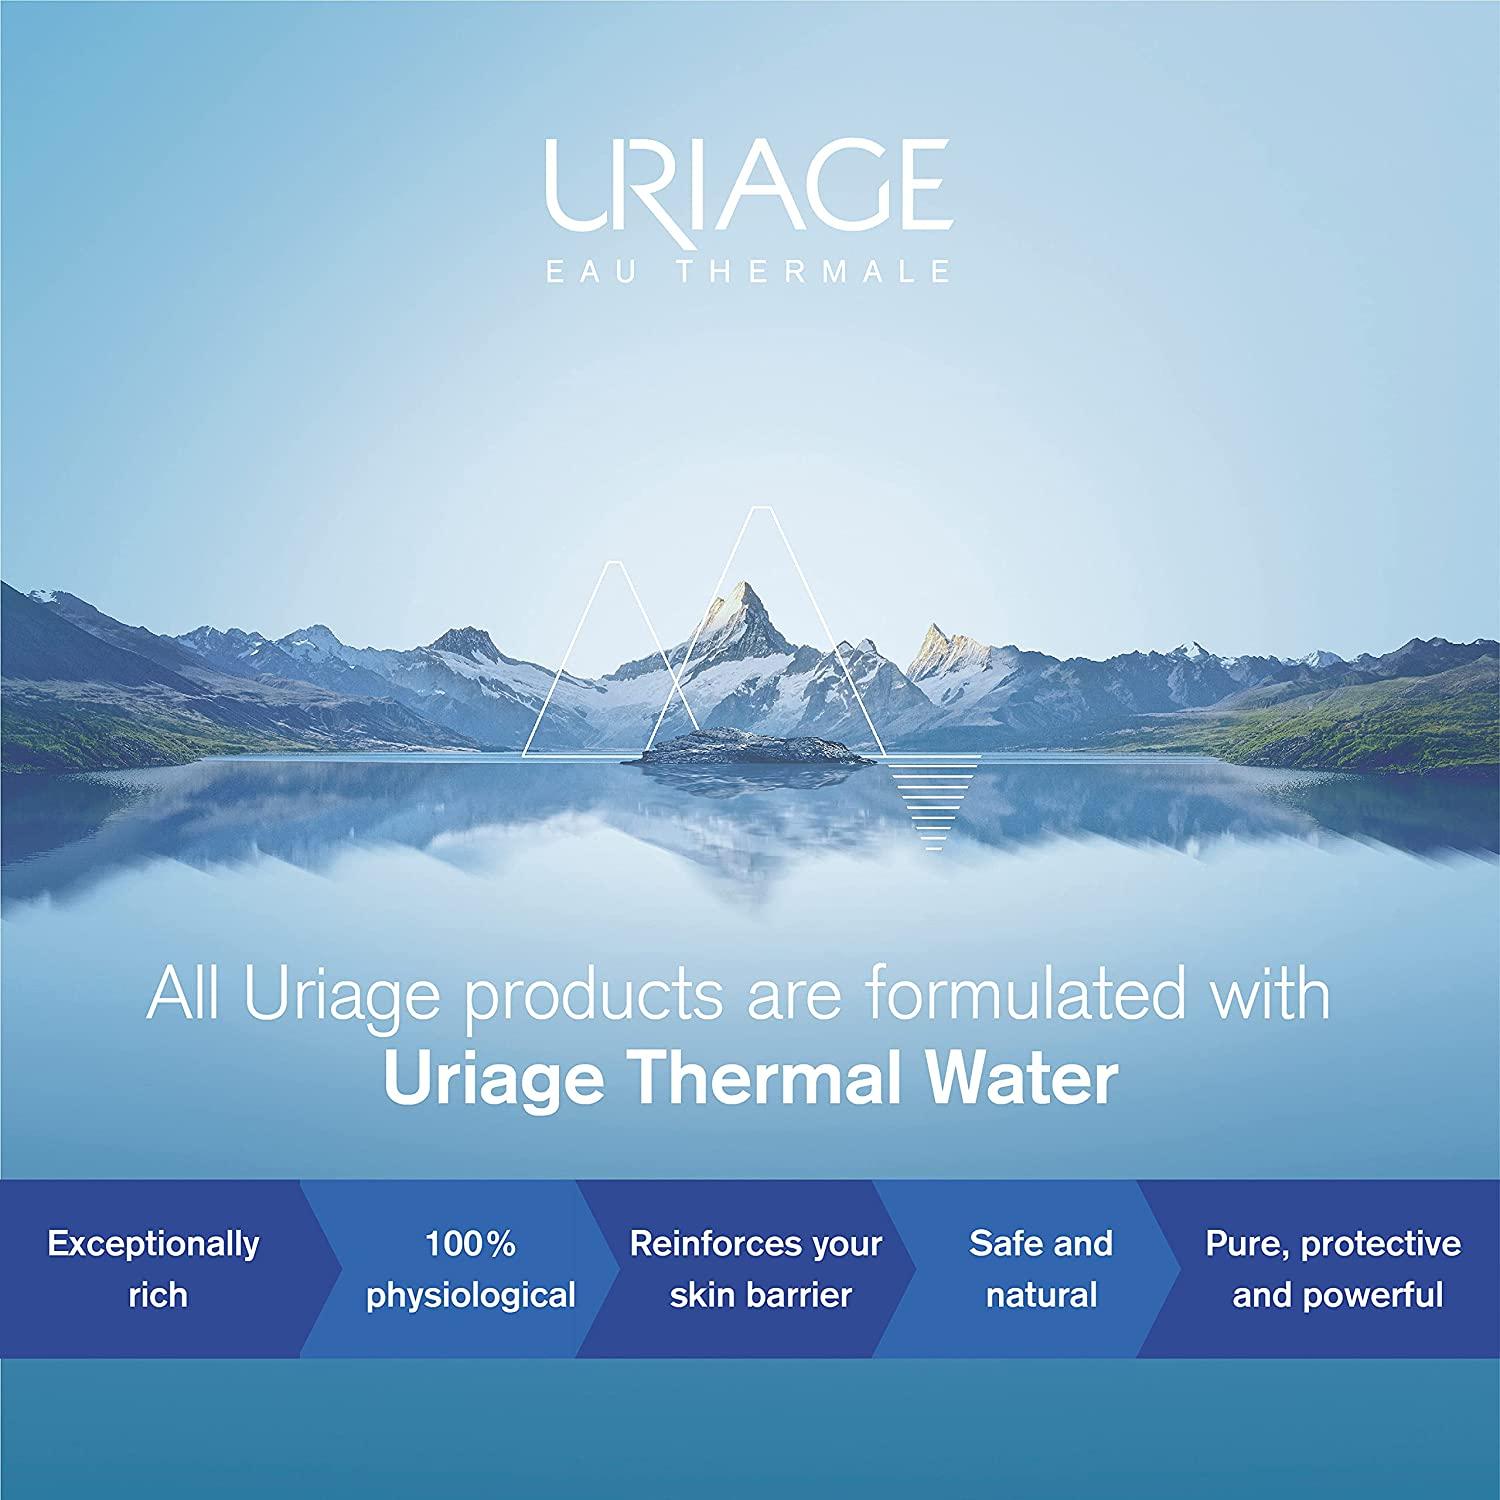 Oils - Dermo-cosmetic products based on Thermal Water that are suitable for  the needs of all skin types - Uriage